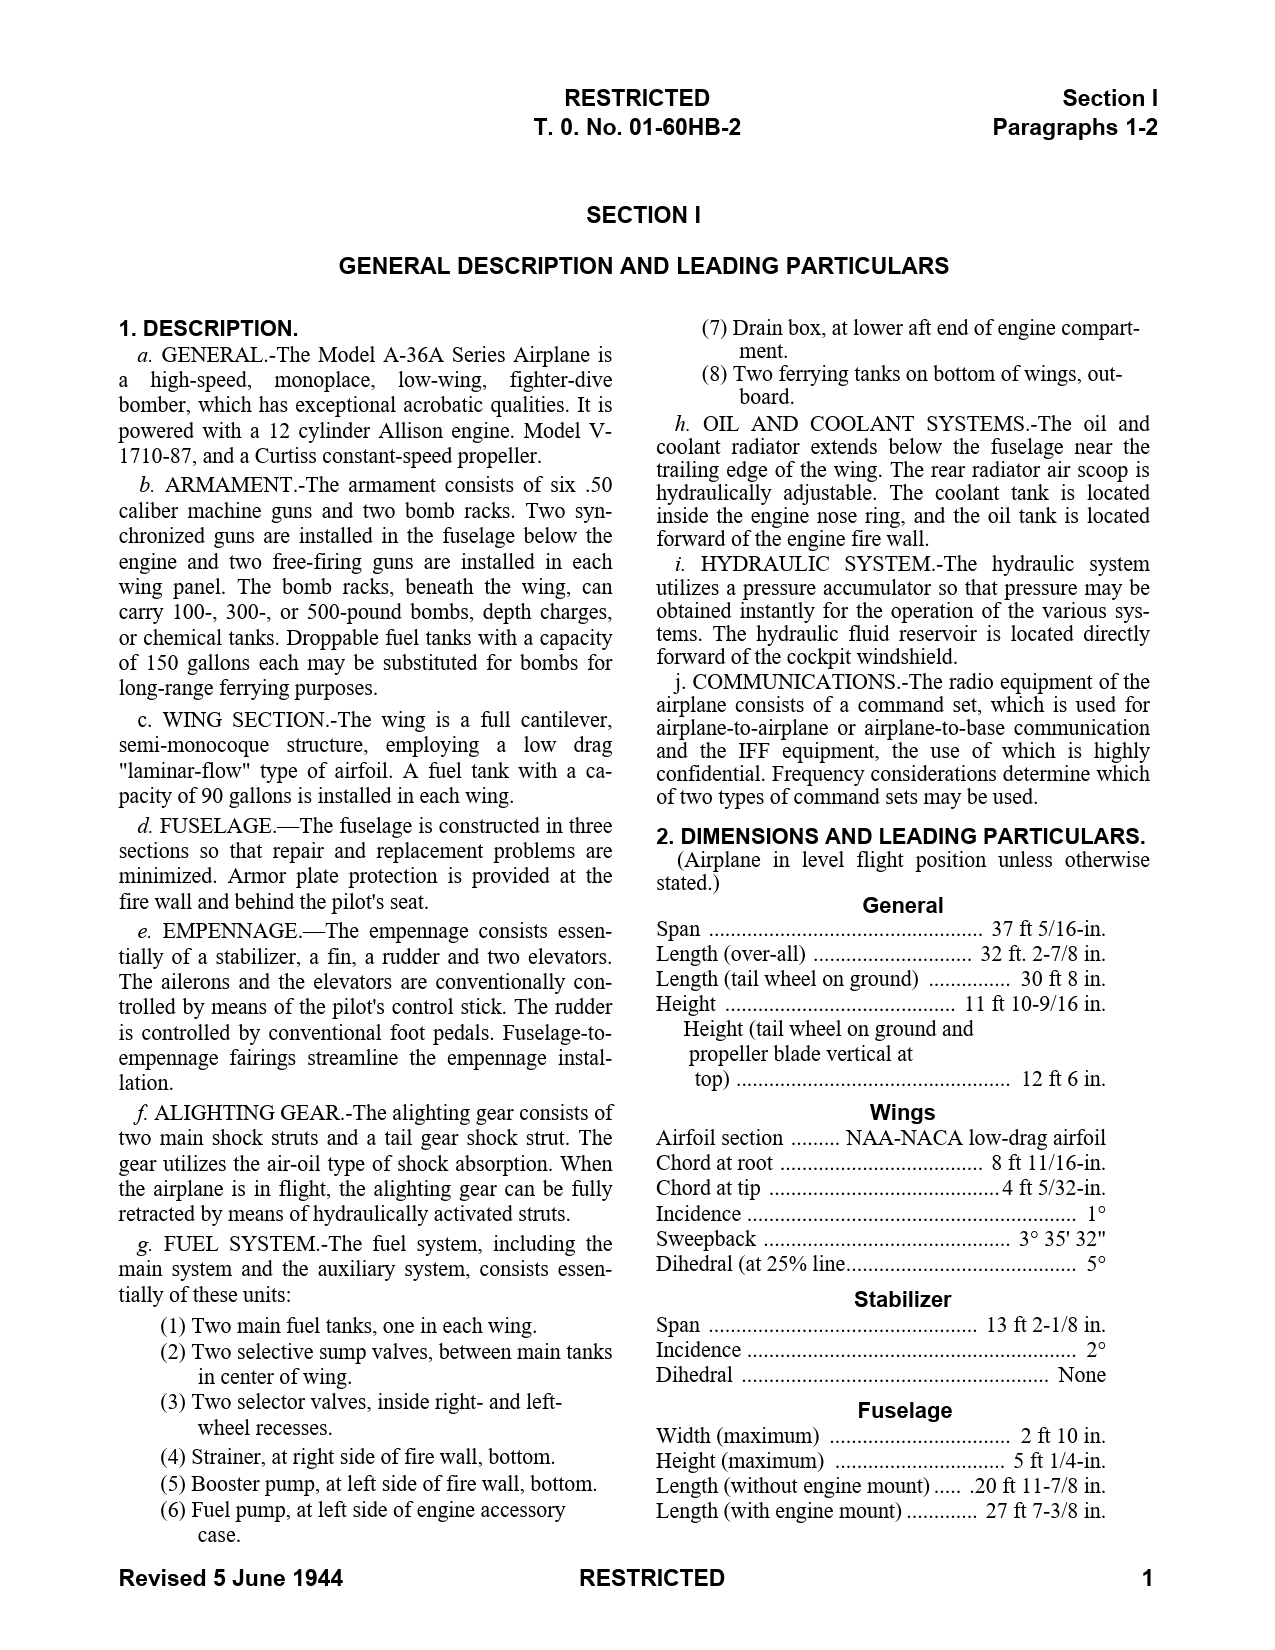 Sample page 7 from AirCorps Library document: Erection and Maintenance Instructions for A-36A